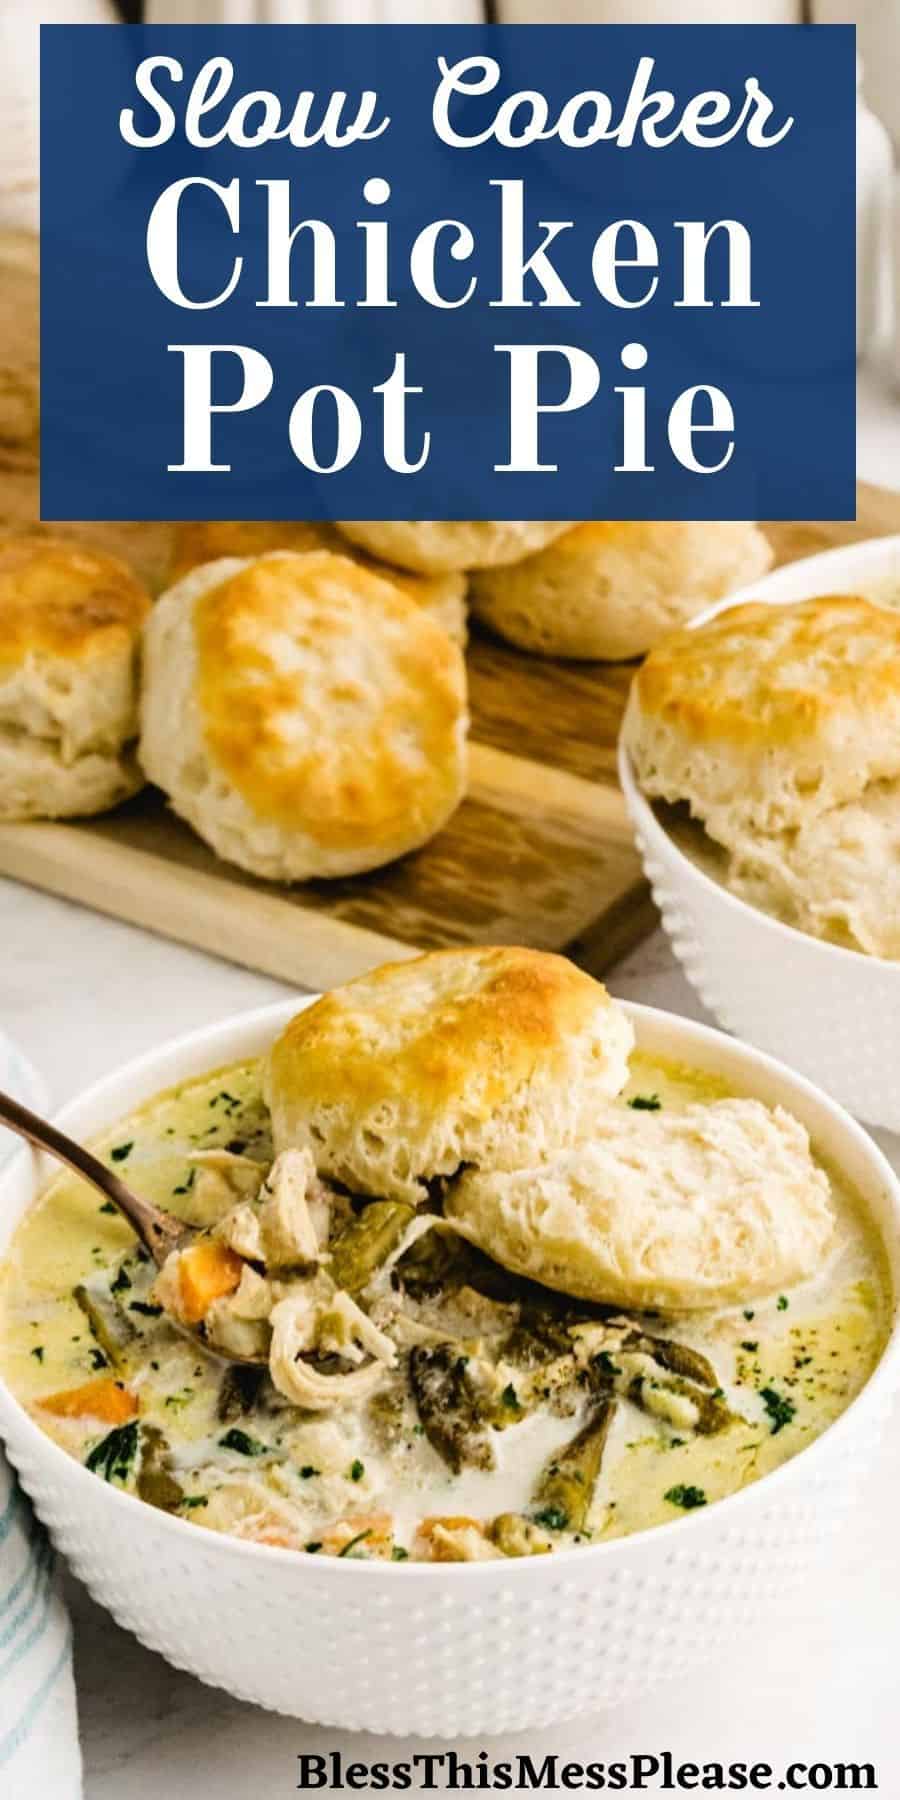 Slow Cooker Chicken Pot Pie Recipe (with Biscuits!)